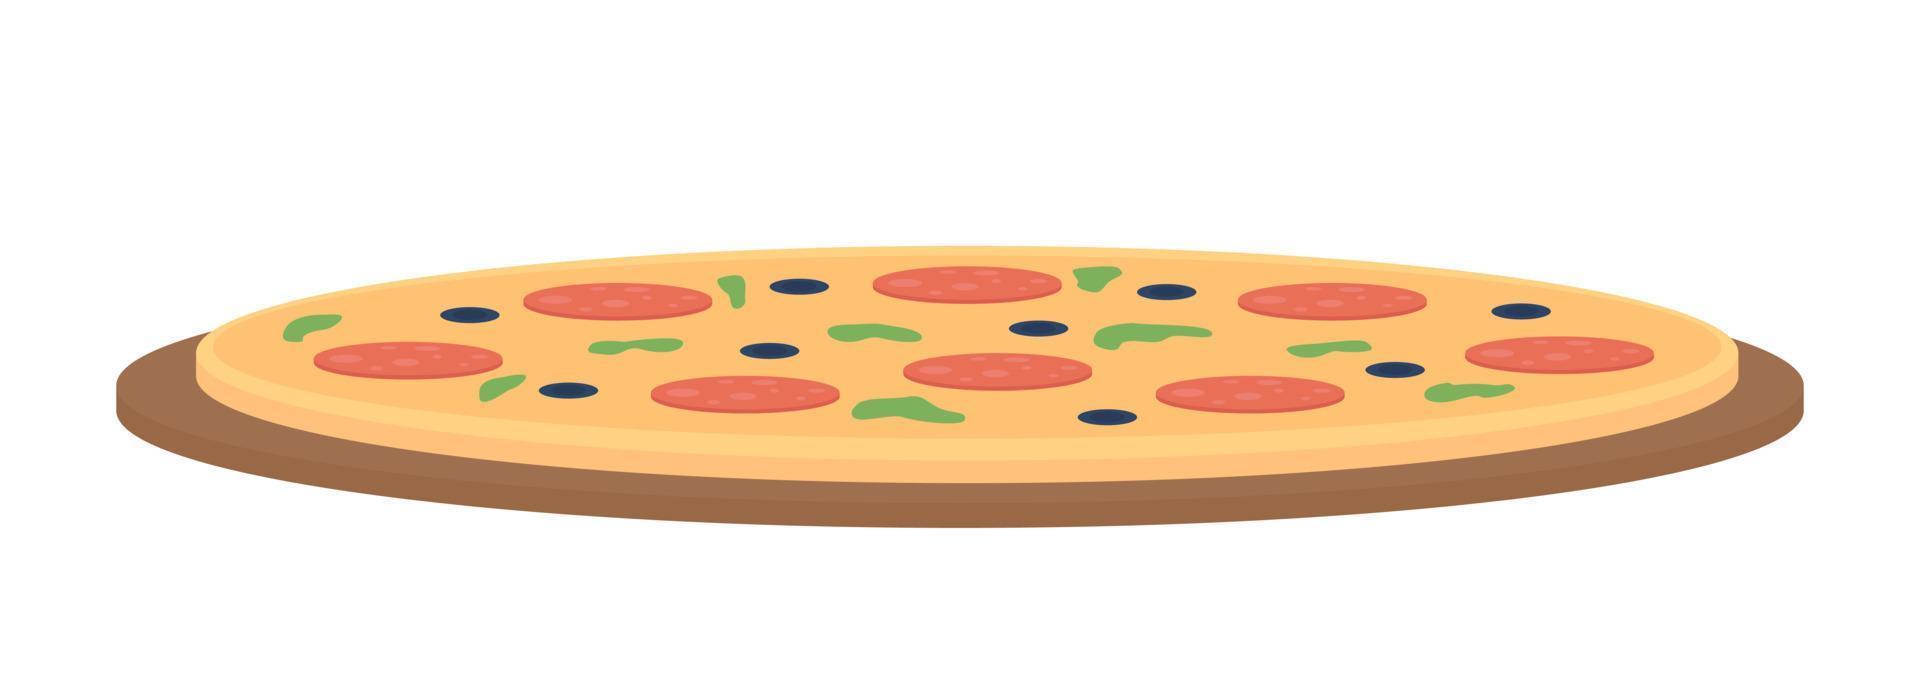 Pizza semi flat color vector object. Editable element. Full sized item on white. Restaurant meal. Italian traditional food simple cartoon style illustration for web graphic design and animation